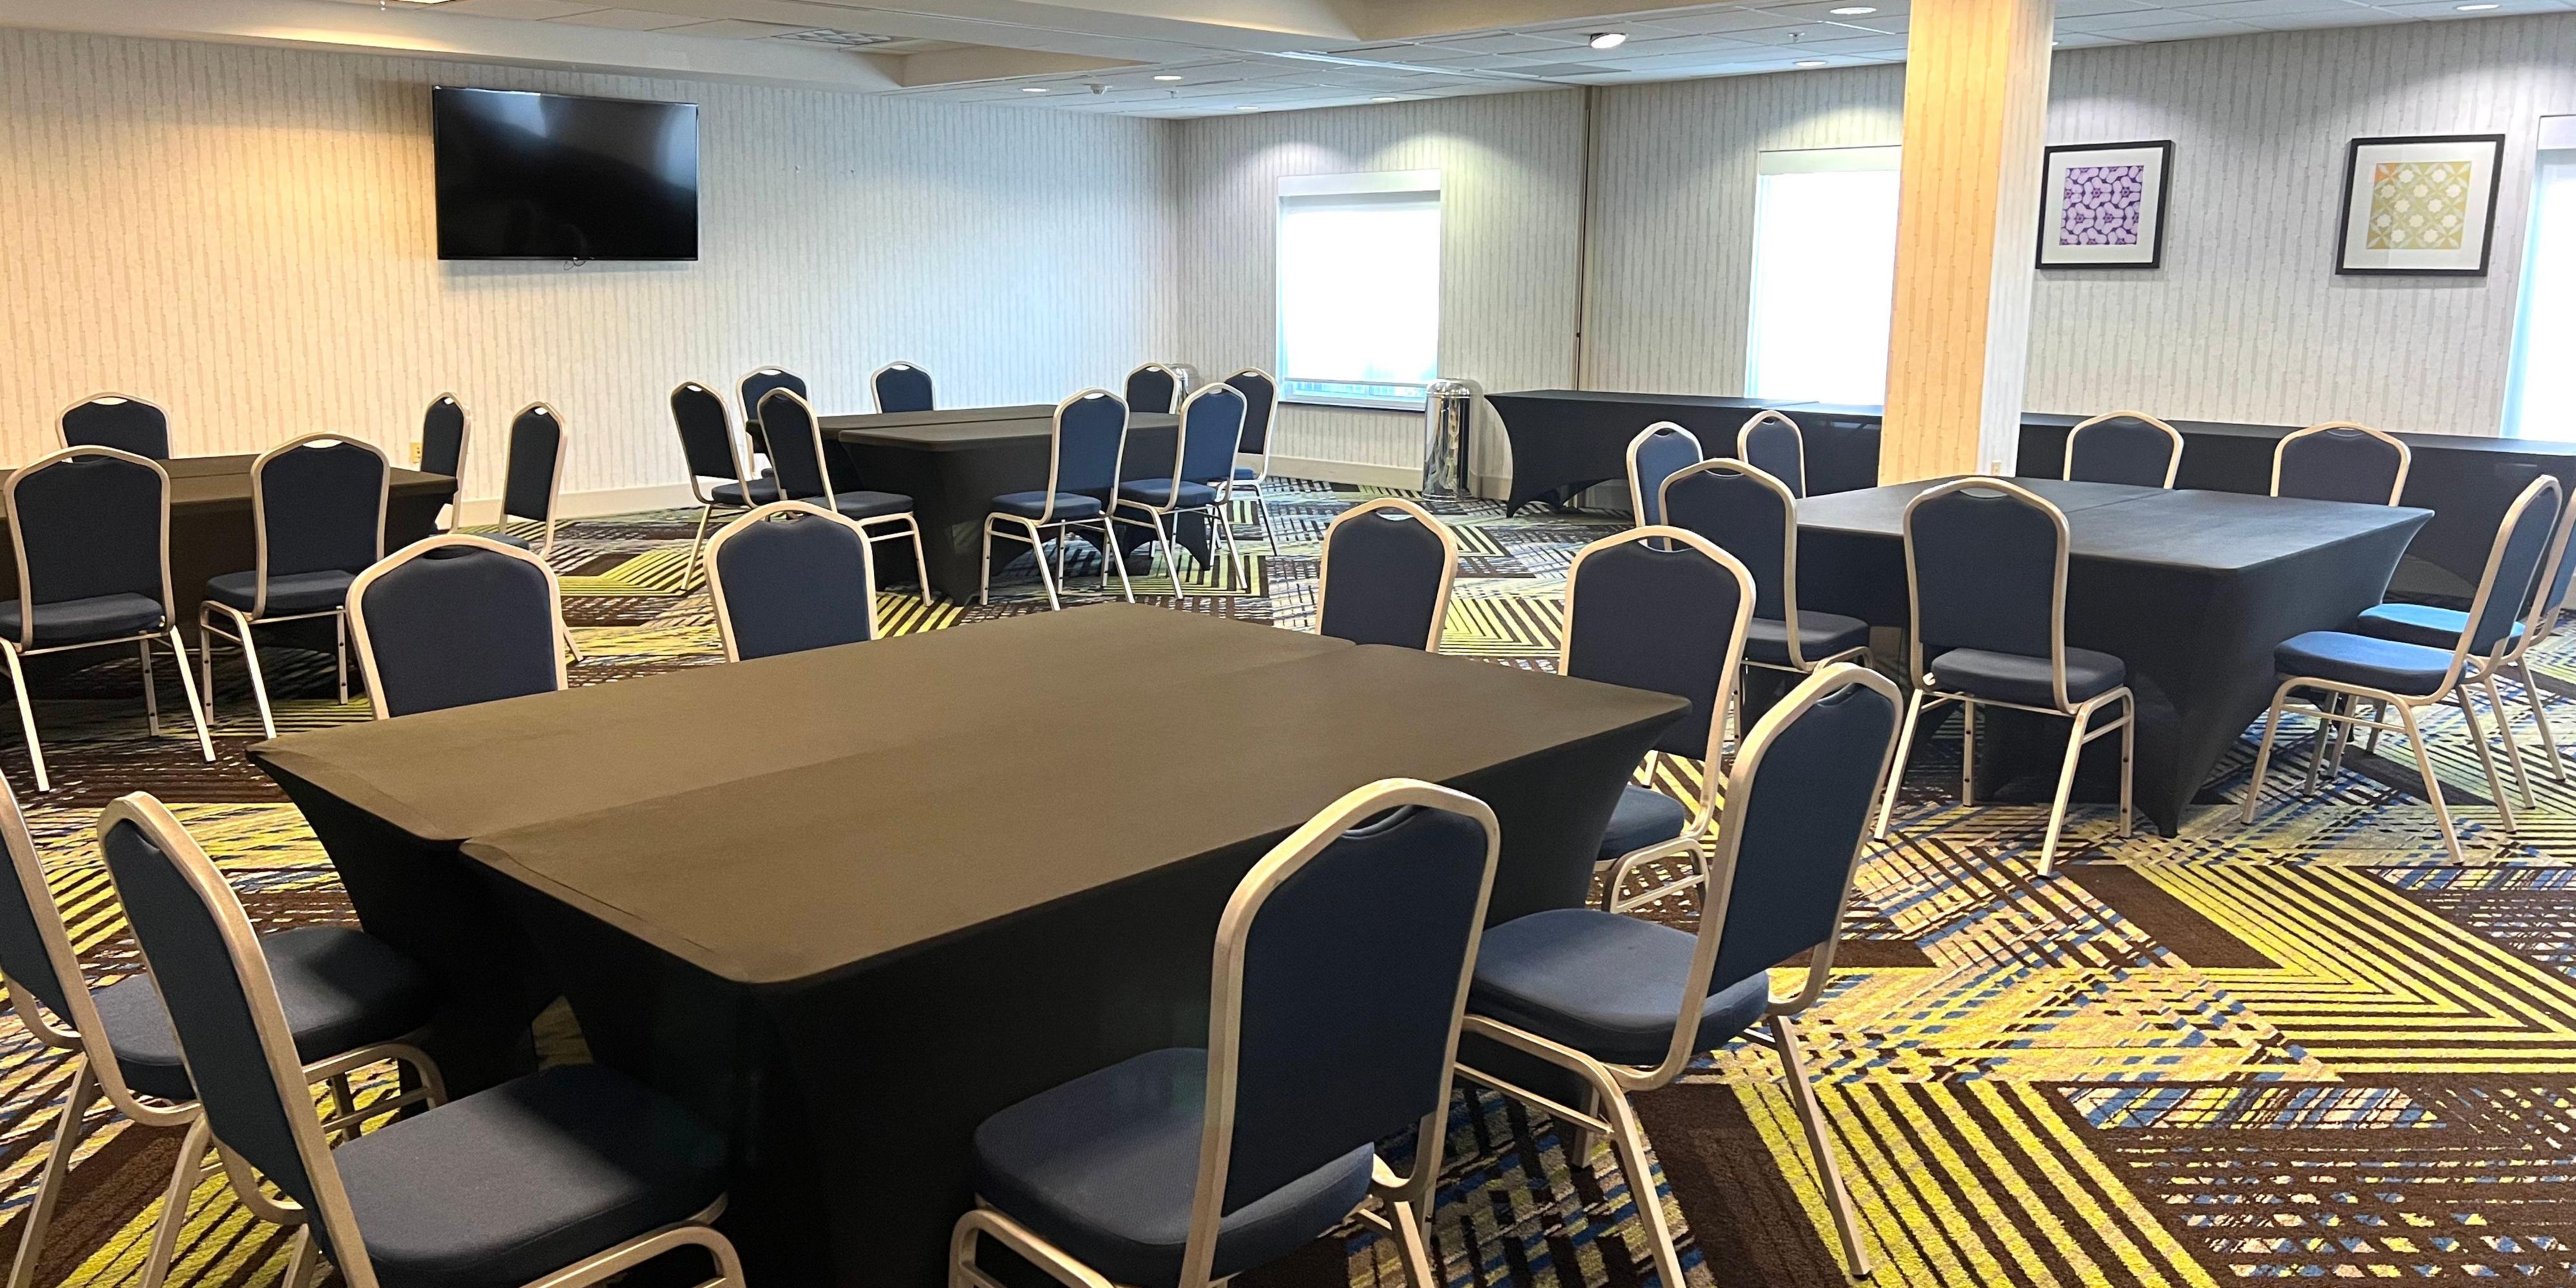 With up to 1,600 square feet of flexible meeting space, the Holiday Inn Express and Suites Waukegan IL is perfectly suited to host your small to medium-sized meeting or event.  The knowledgeable and attentive sales team will be with you every step of the planning process.  Our attention to detail will make your meeting or event a success.